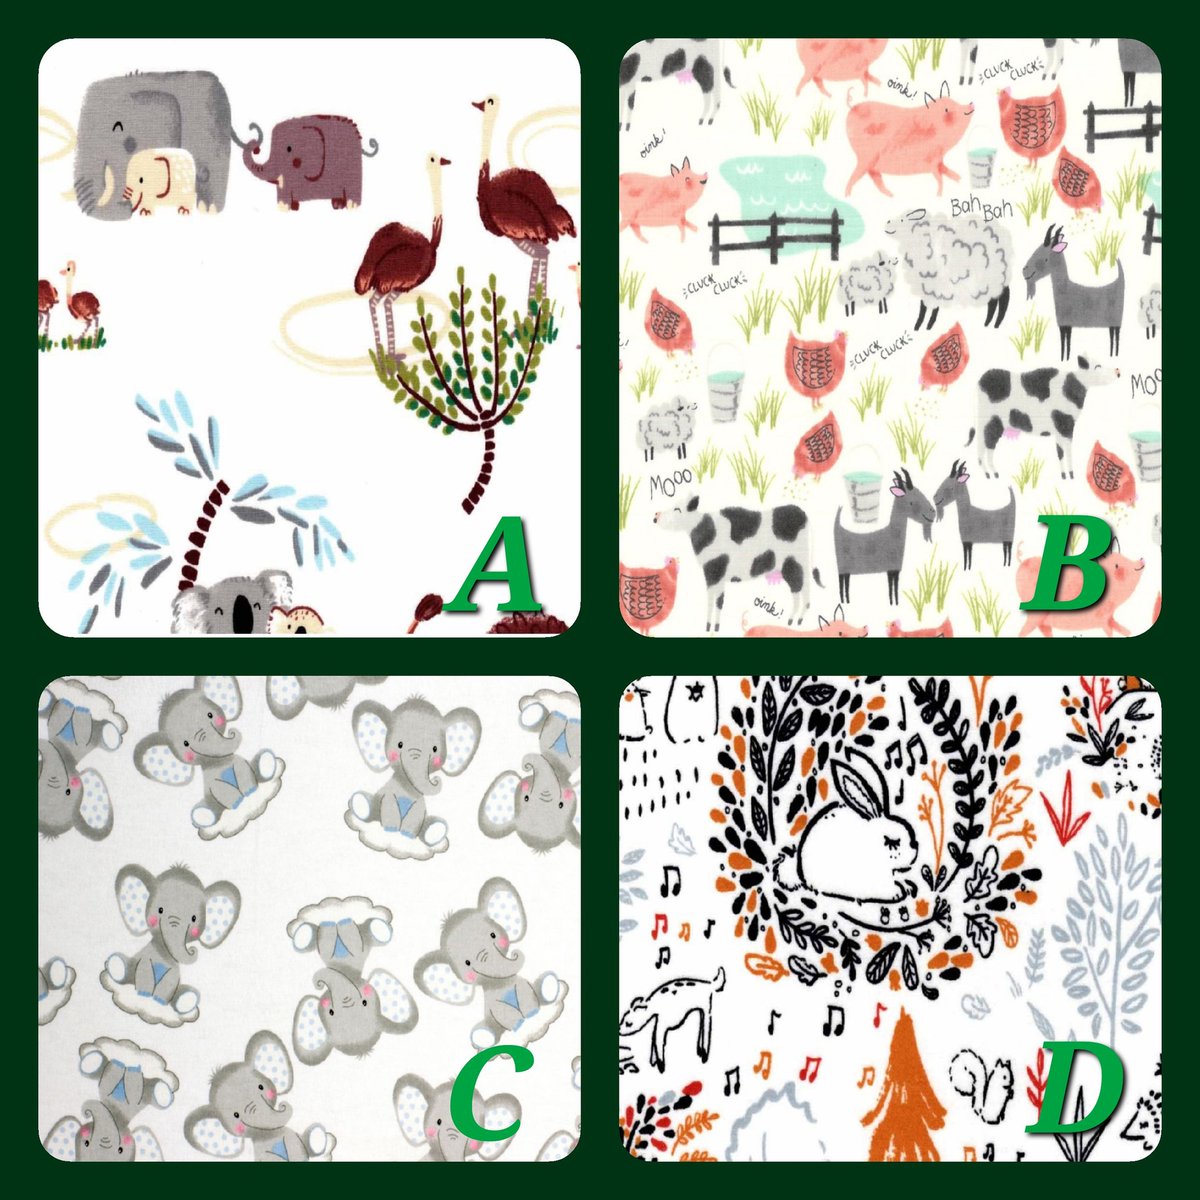 POLL TIME!! Looking for some inspiration for our next project! Please vote for your favorite fabric by leaving a comment below. Thank you! ❤️ 

#craftingzdreamz #smallbusiness #handmadewithlove #handmade #babynursery #poll #fabric